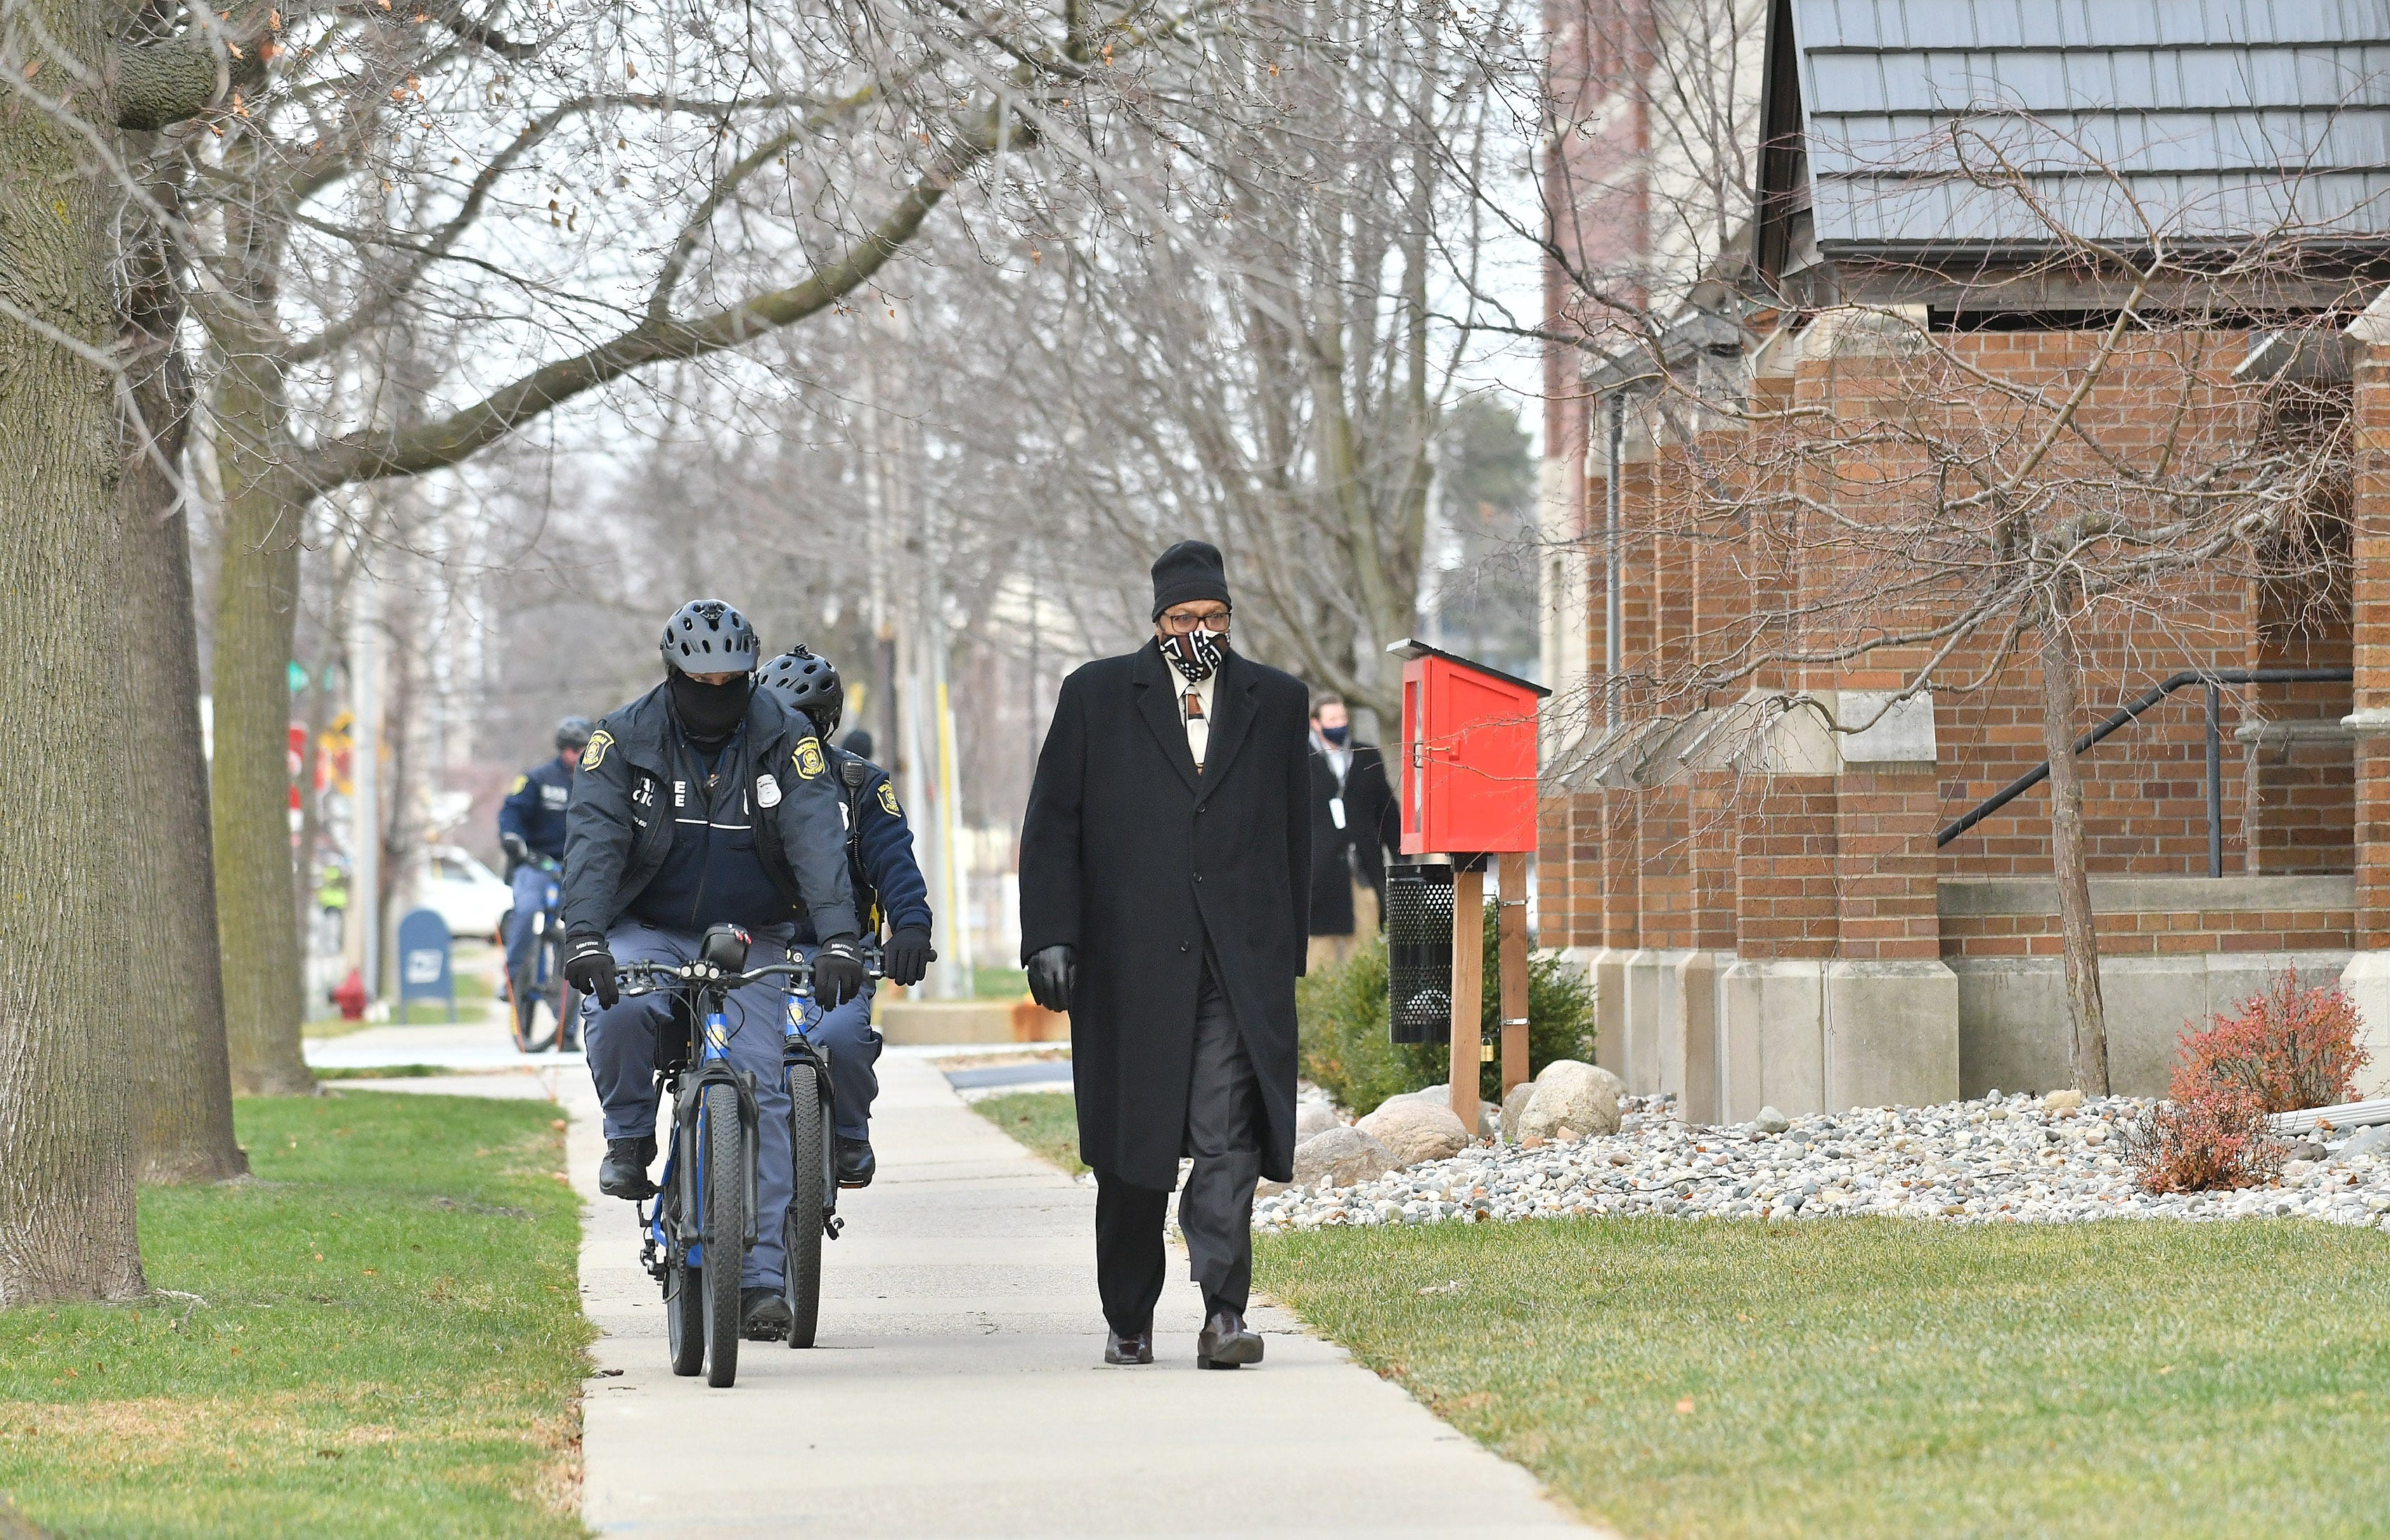 Michigan State Police officers escort Democratic elector Tim Smith from the parking garage to the Michigan State Capitol in Lansing, Mich. on Dec. 14, 2020.   The electors are casting their votes today at the capitol for the president and vice president.